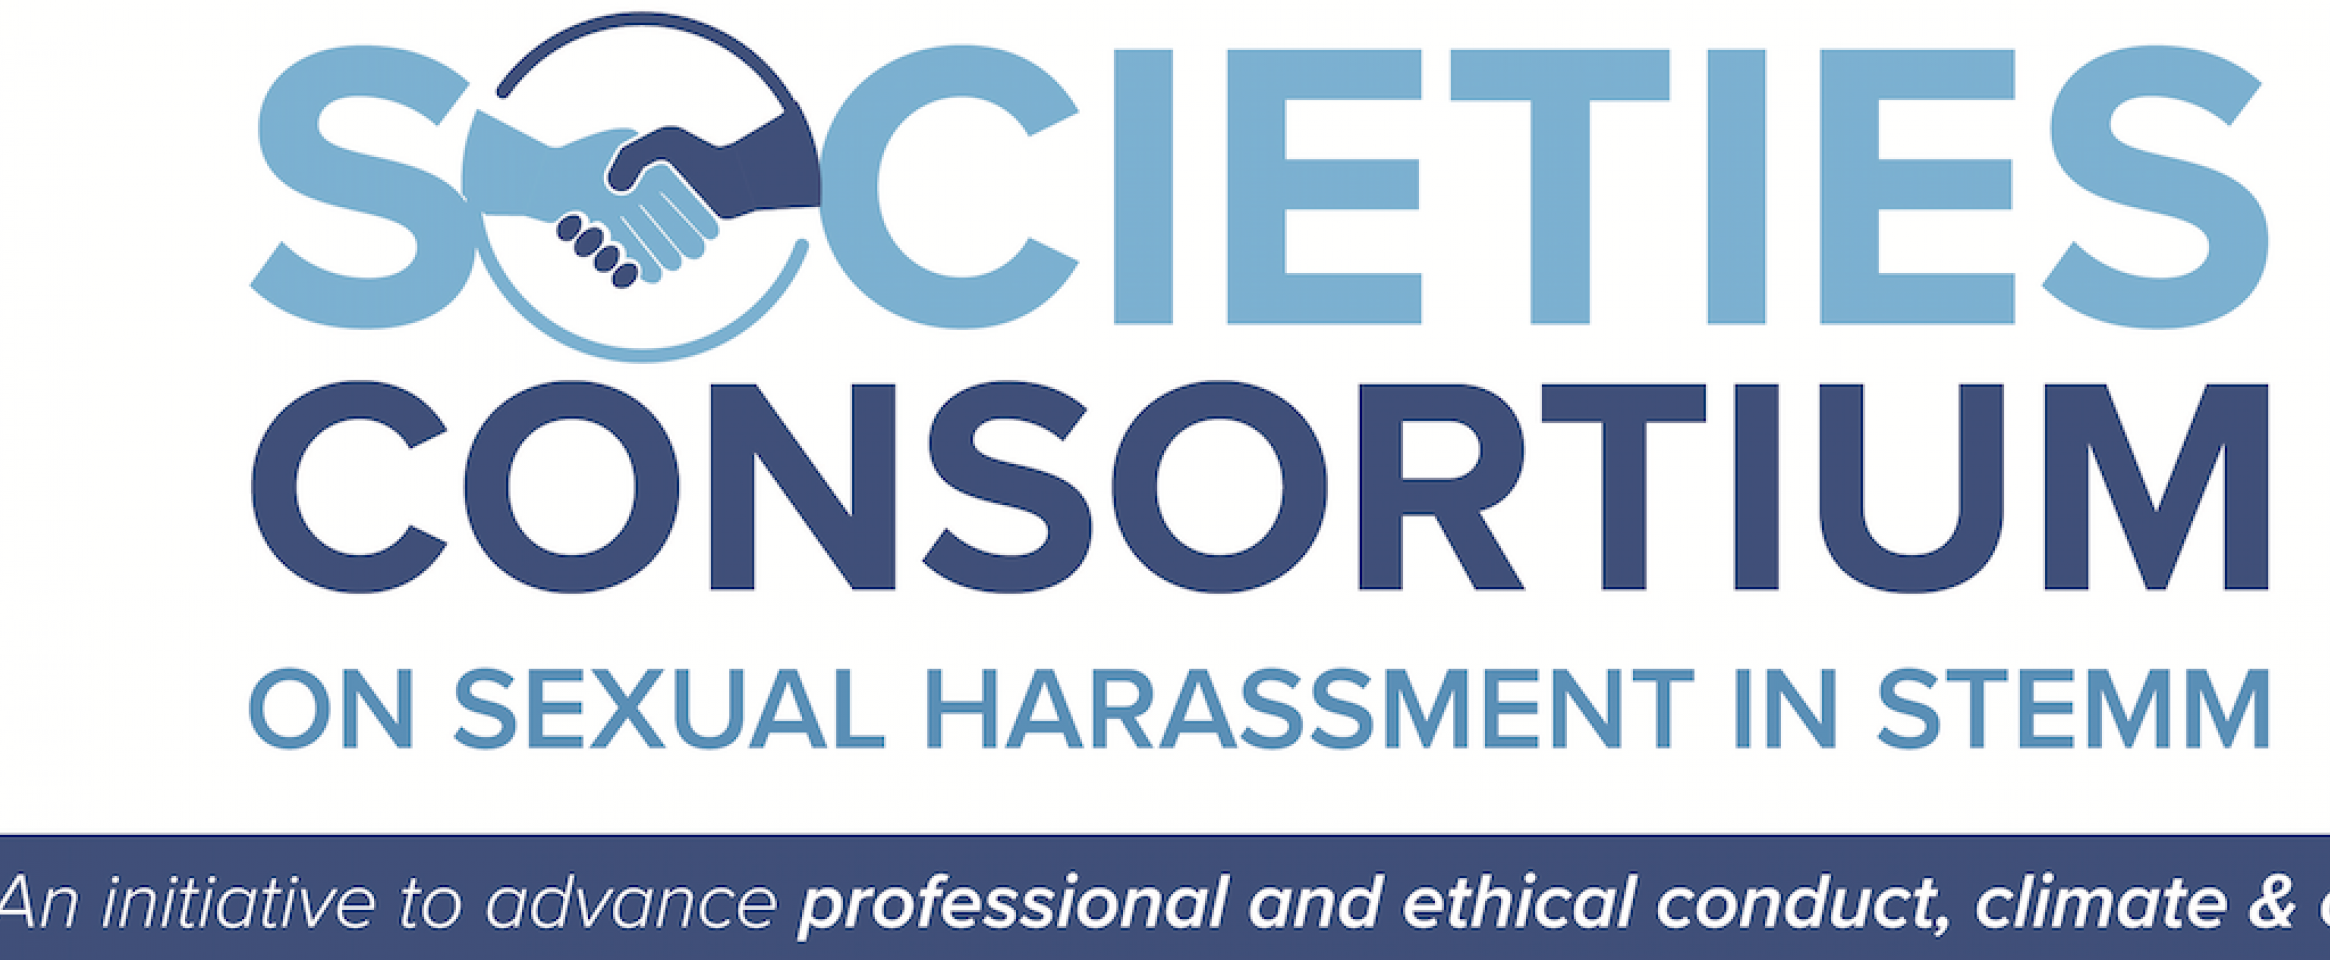 Logo of the Societies Consortium on Sexual Harassment in STEMM